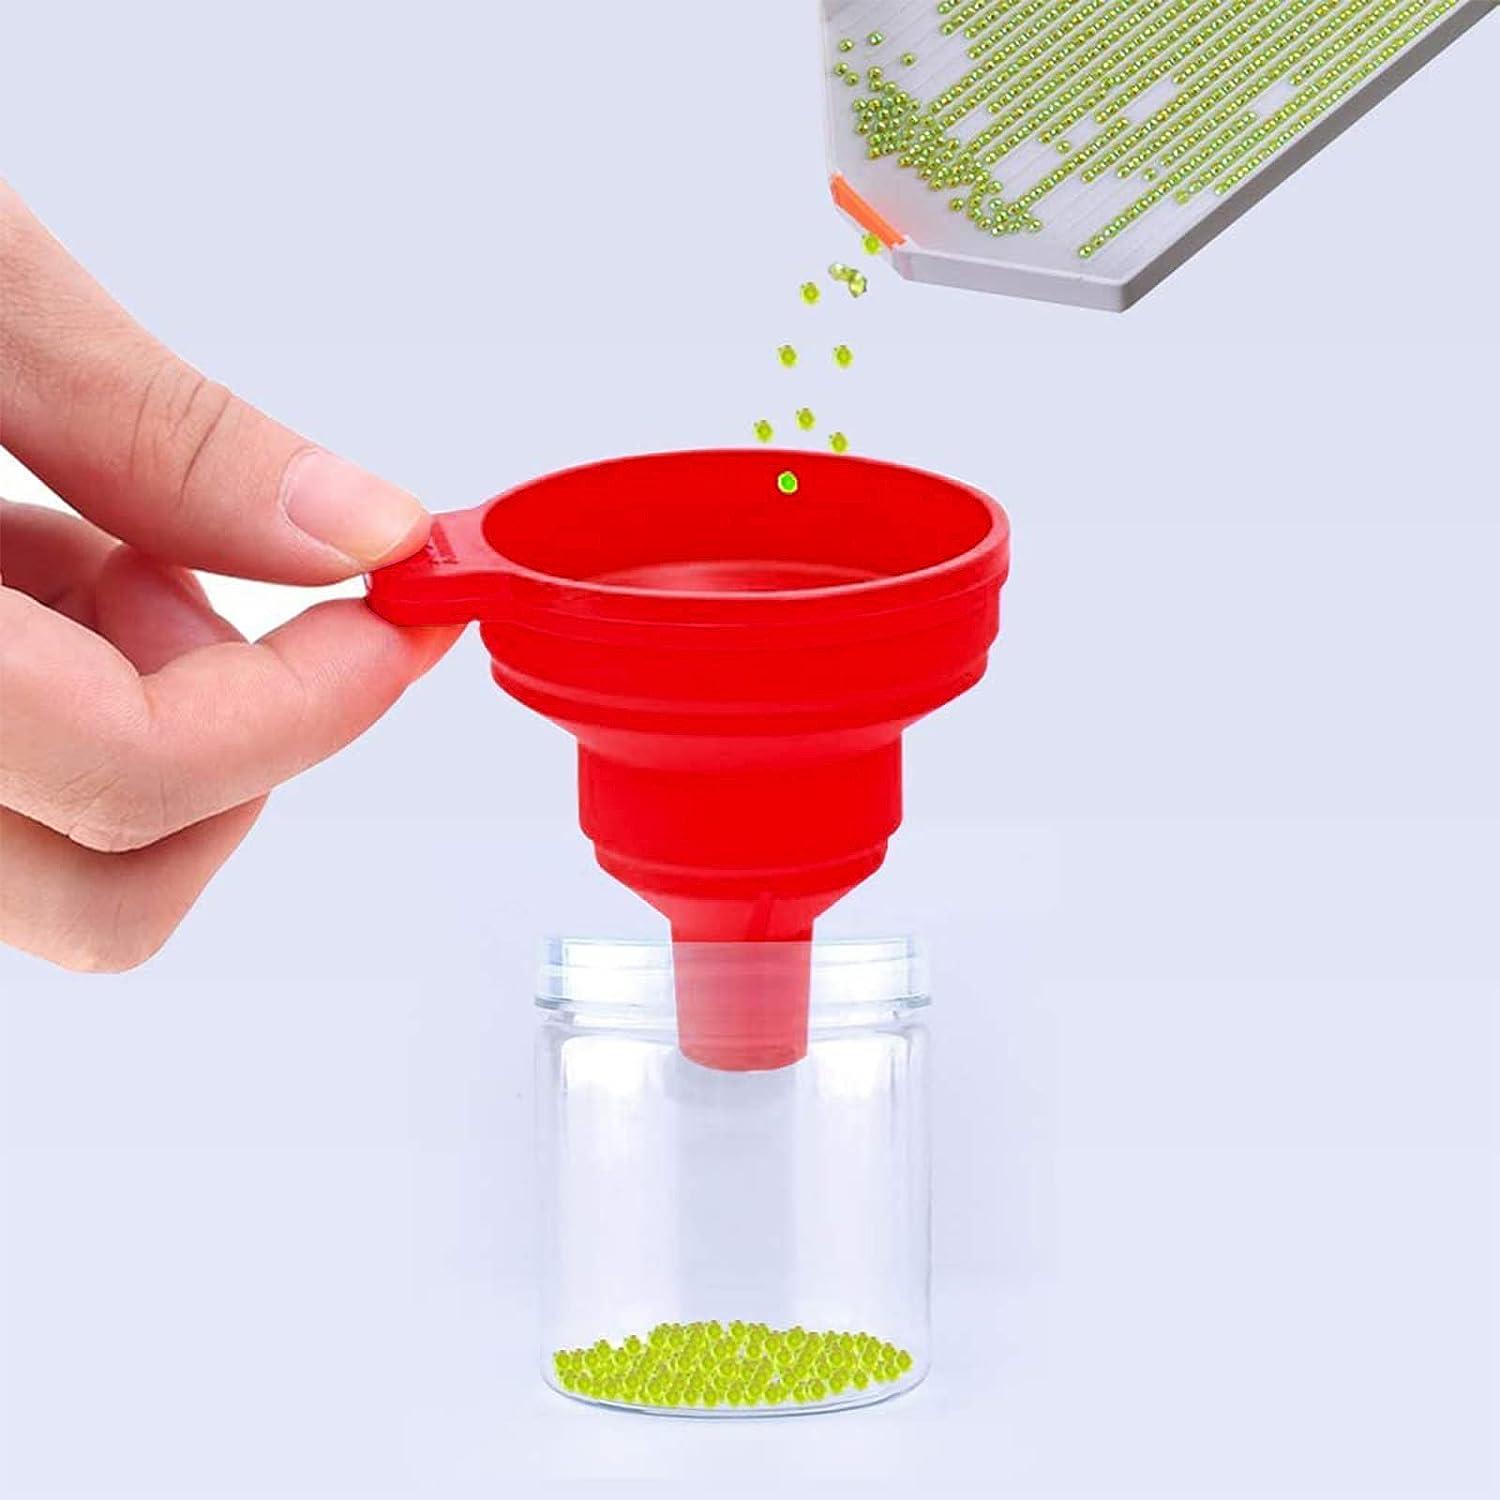 2 Pcs Diamond Painting Tools Funnel - Silicone Collapsible Funnel  Convenient Foldable Beads Container Mosaic Tool for 5D DIY Diamond Painting  Kits for Adults.